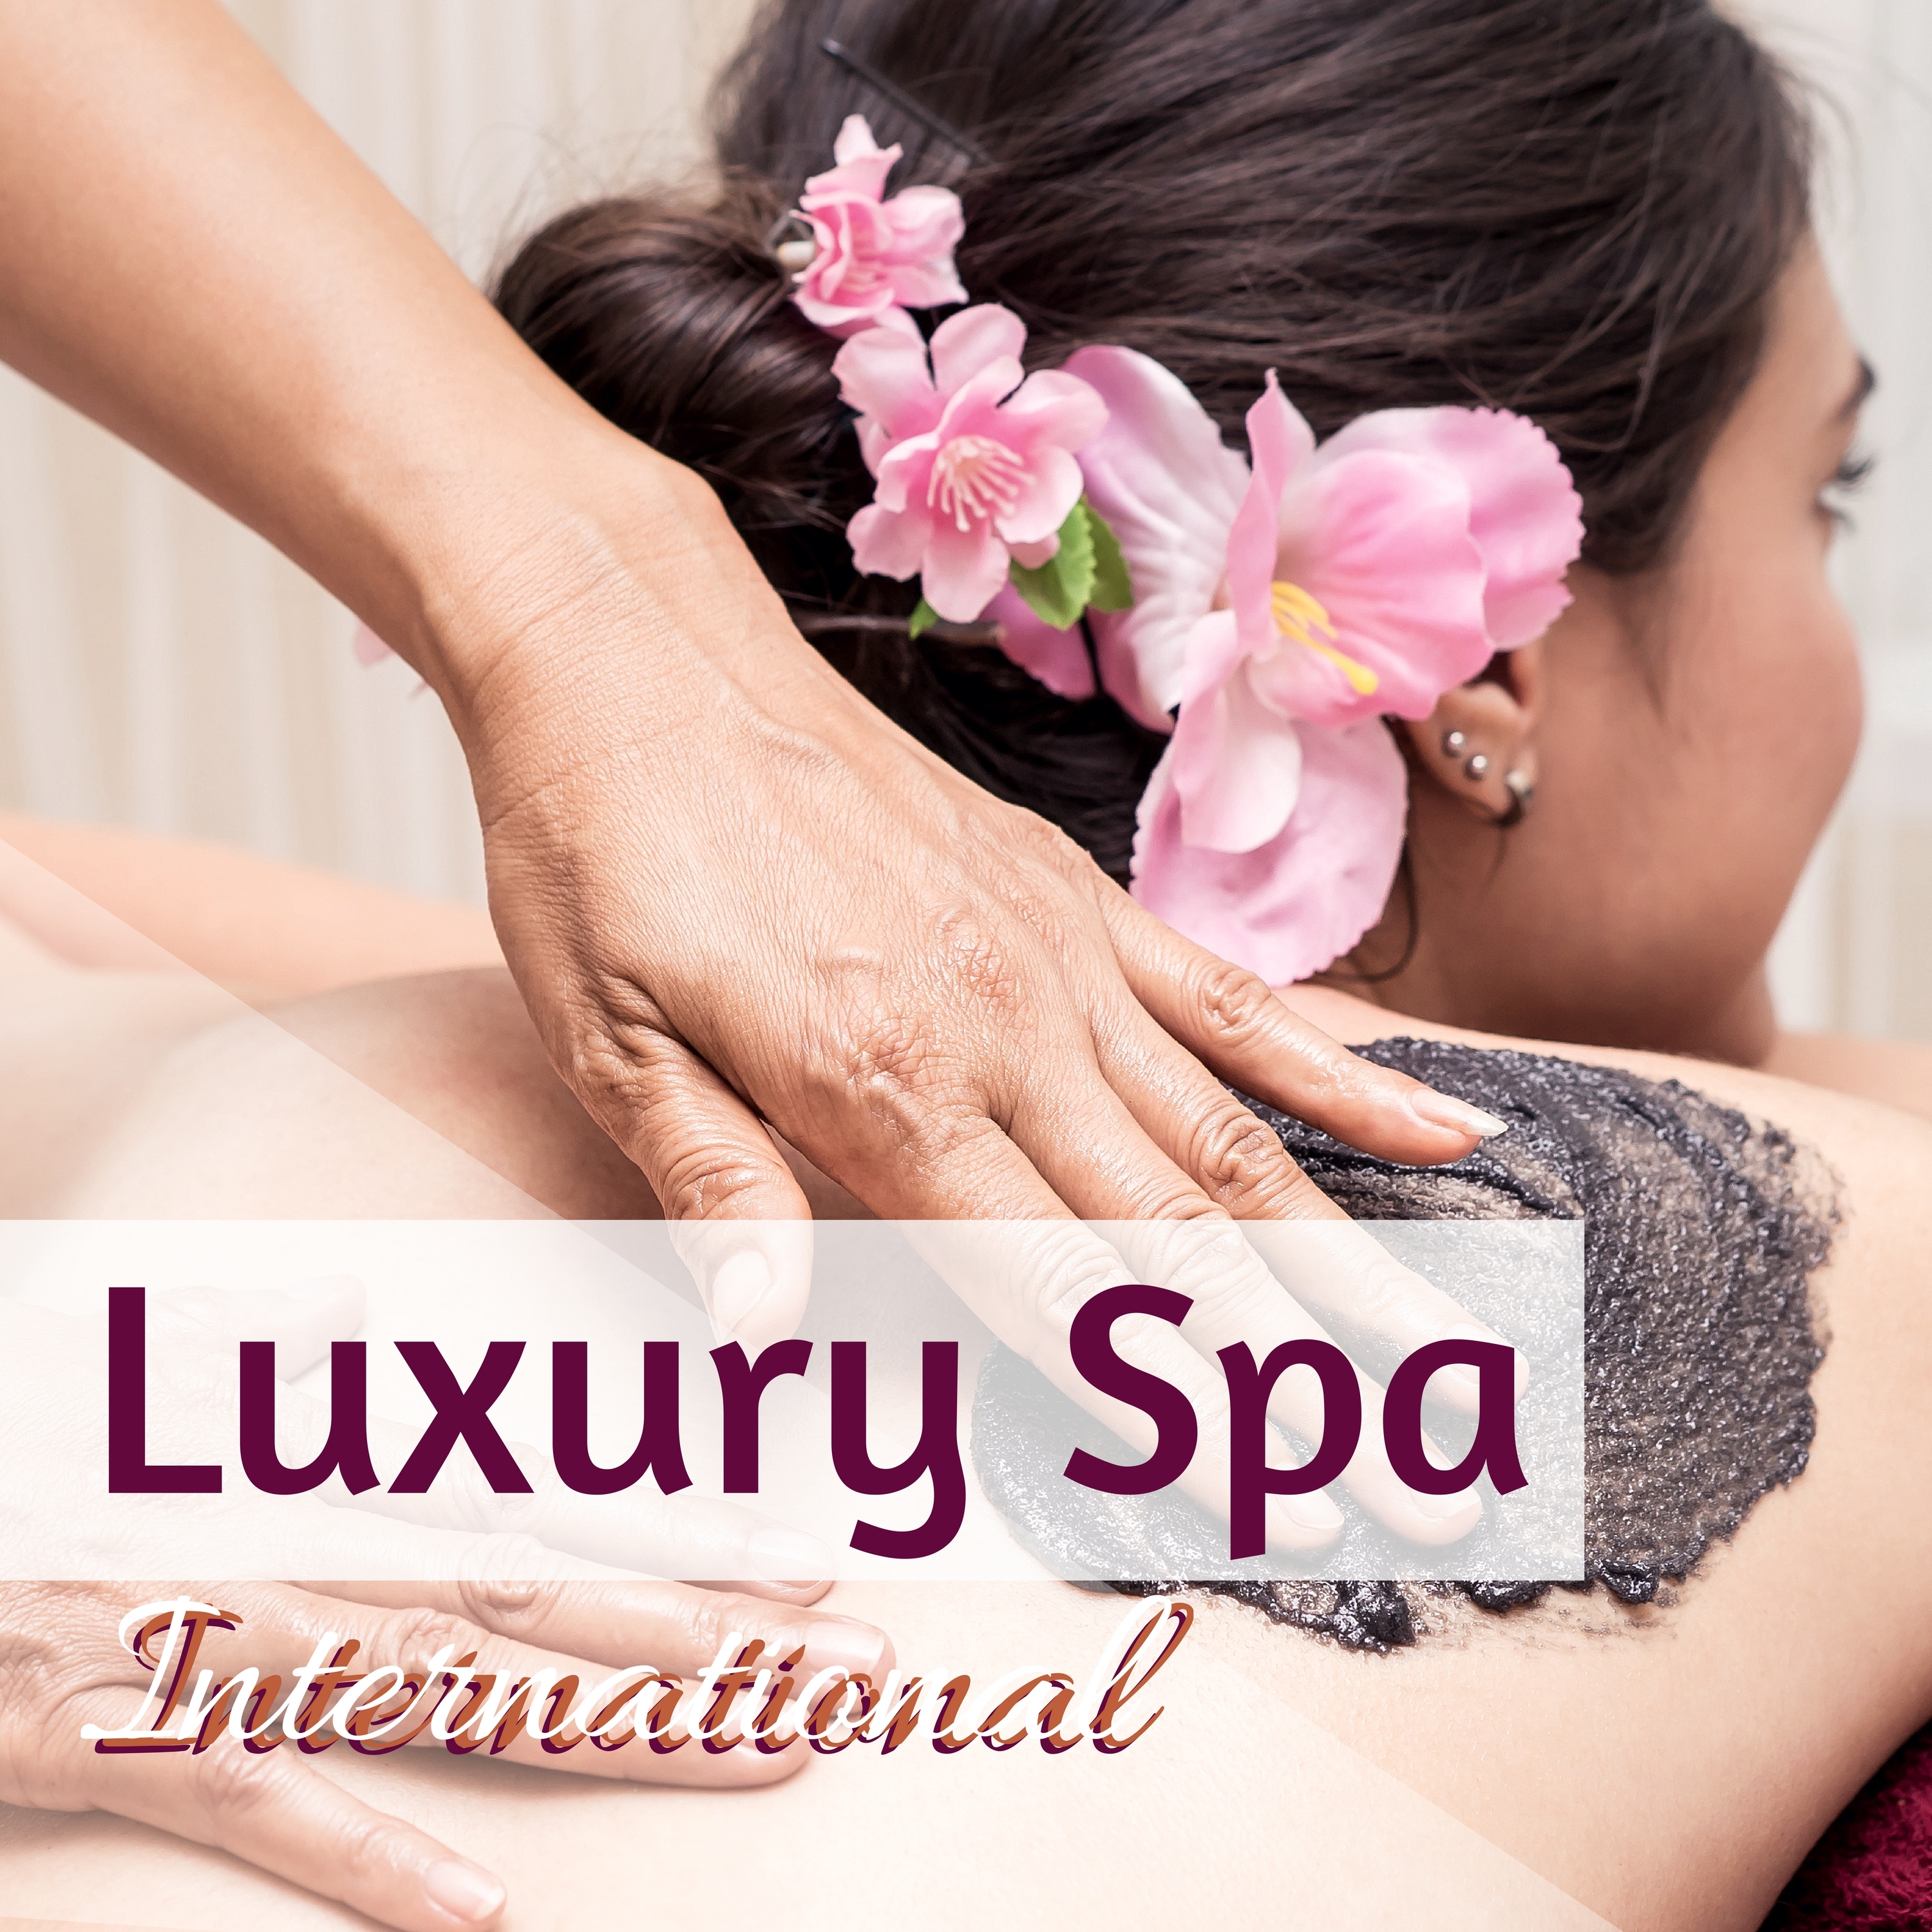 Luxury Spa International - Zen Spa Background Songs for Hotels and Wellness Center